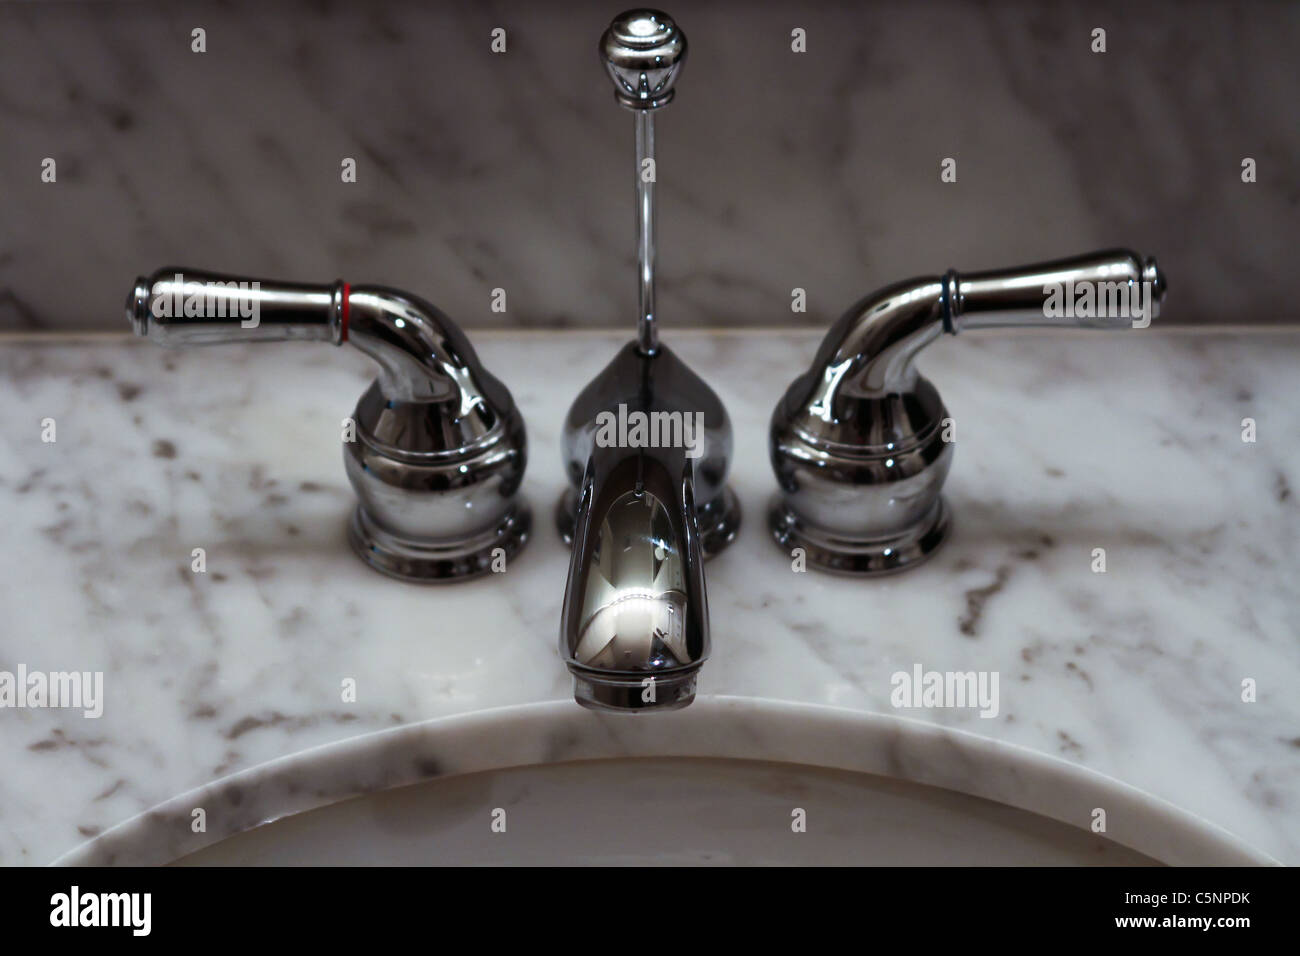 stainless steel facet marble sink Stock Photo